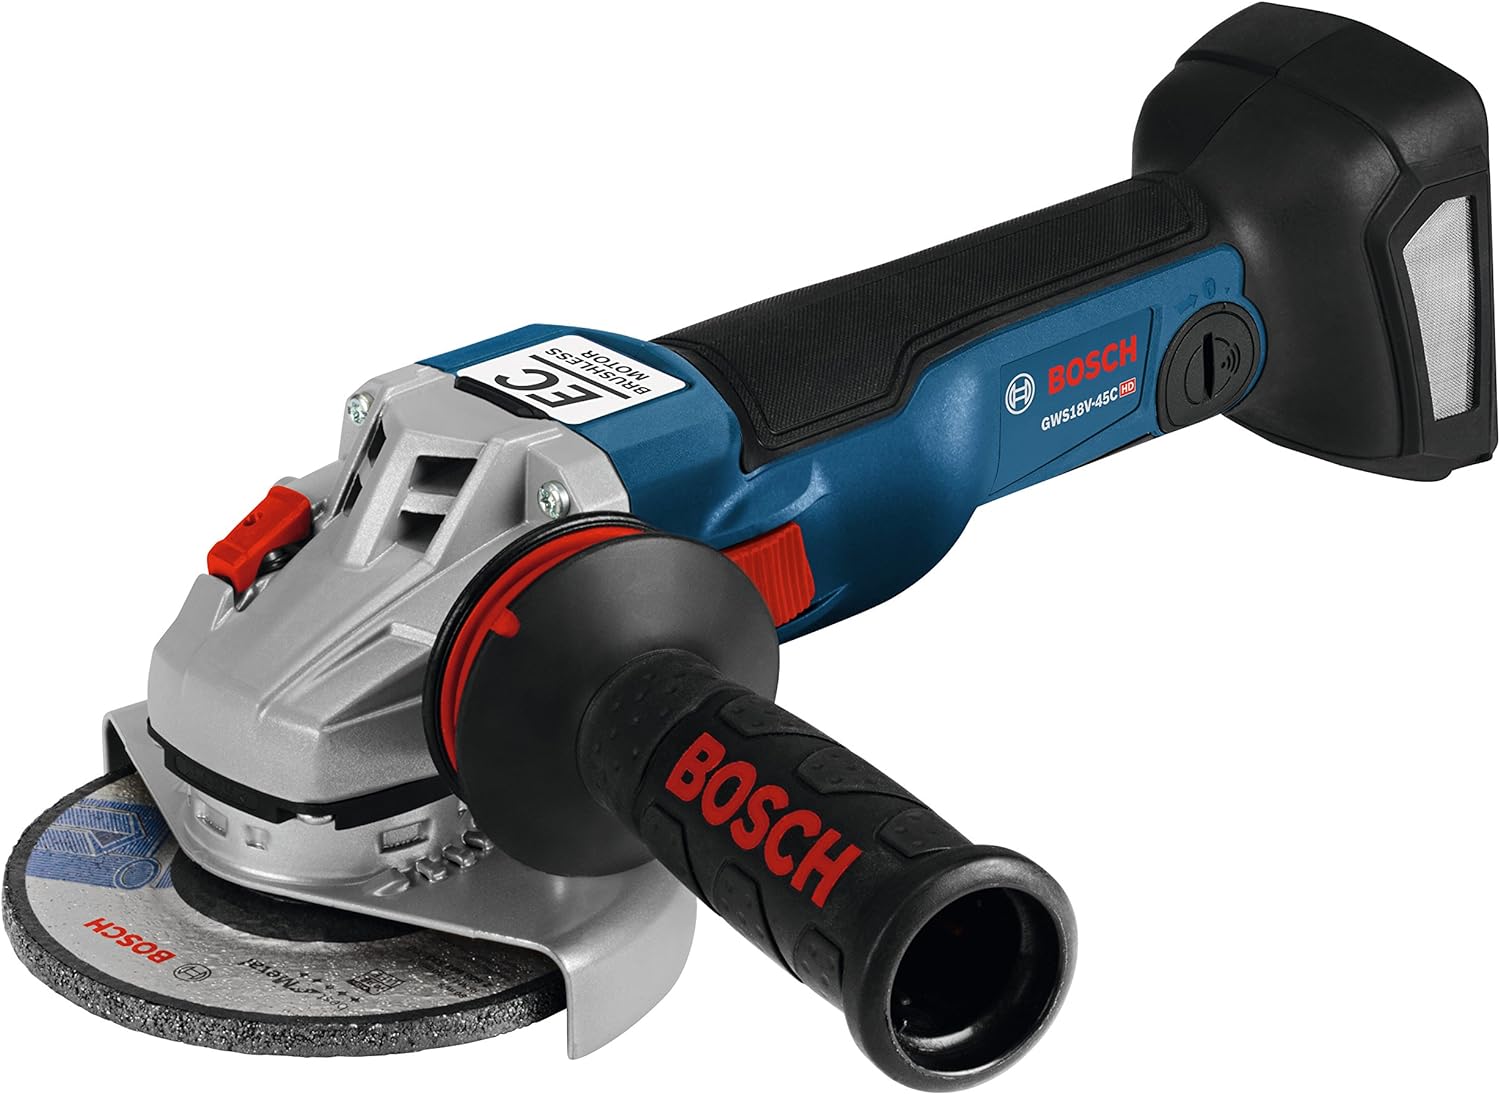 BOSCH 18V EC Brushless Connected-Ready 4.5 In. Angle Grinder (Bare Tool) GWS18V-45CN